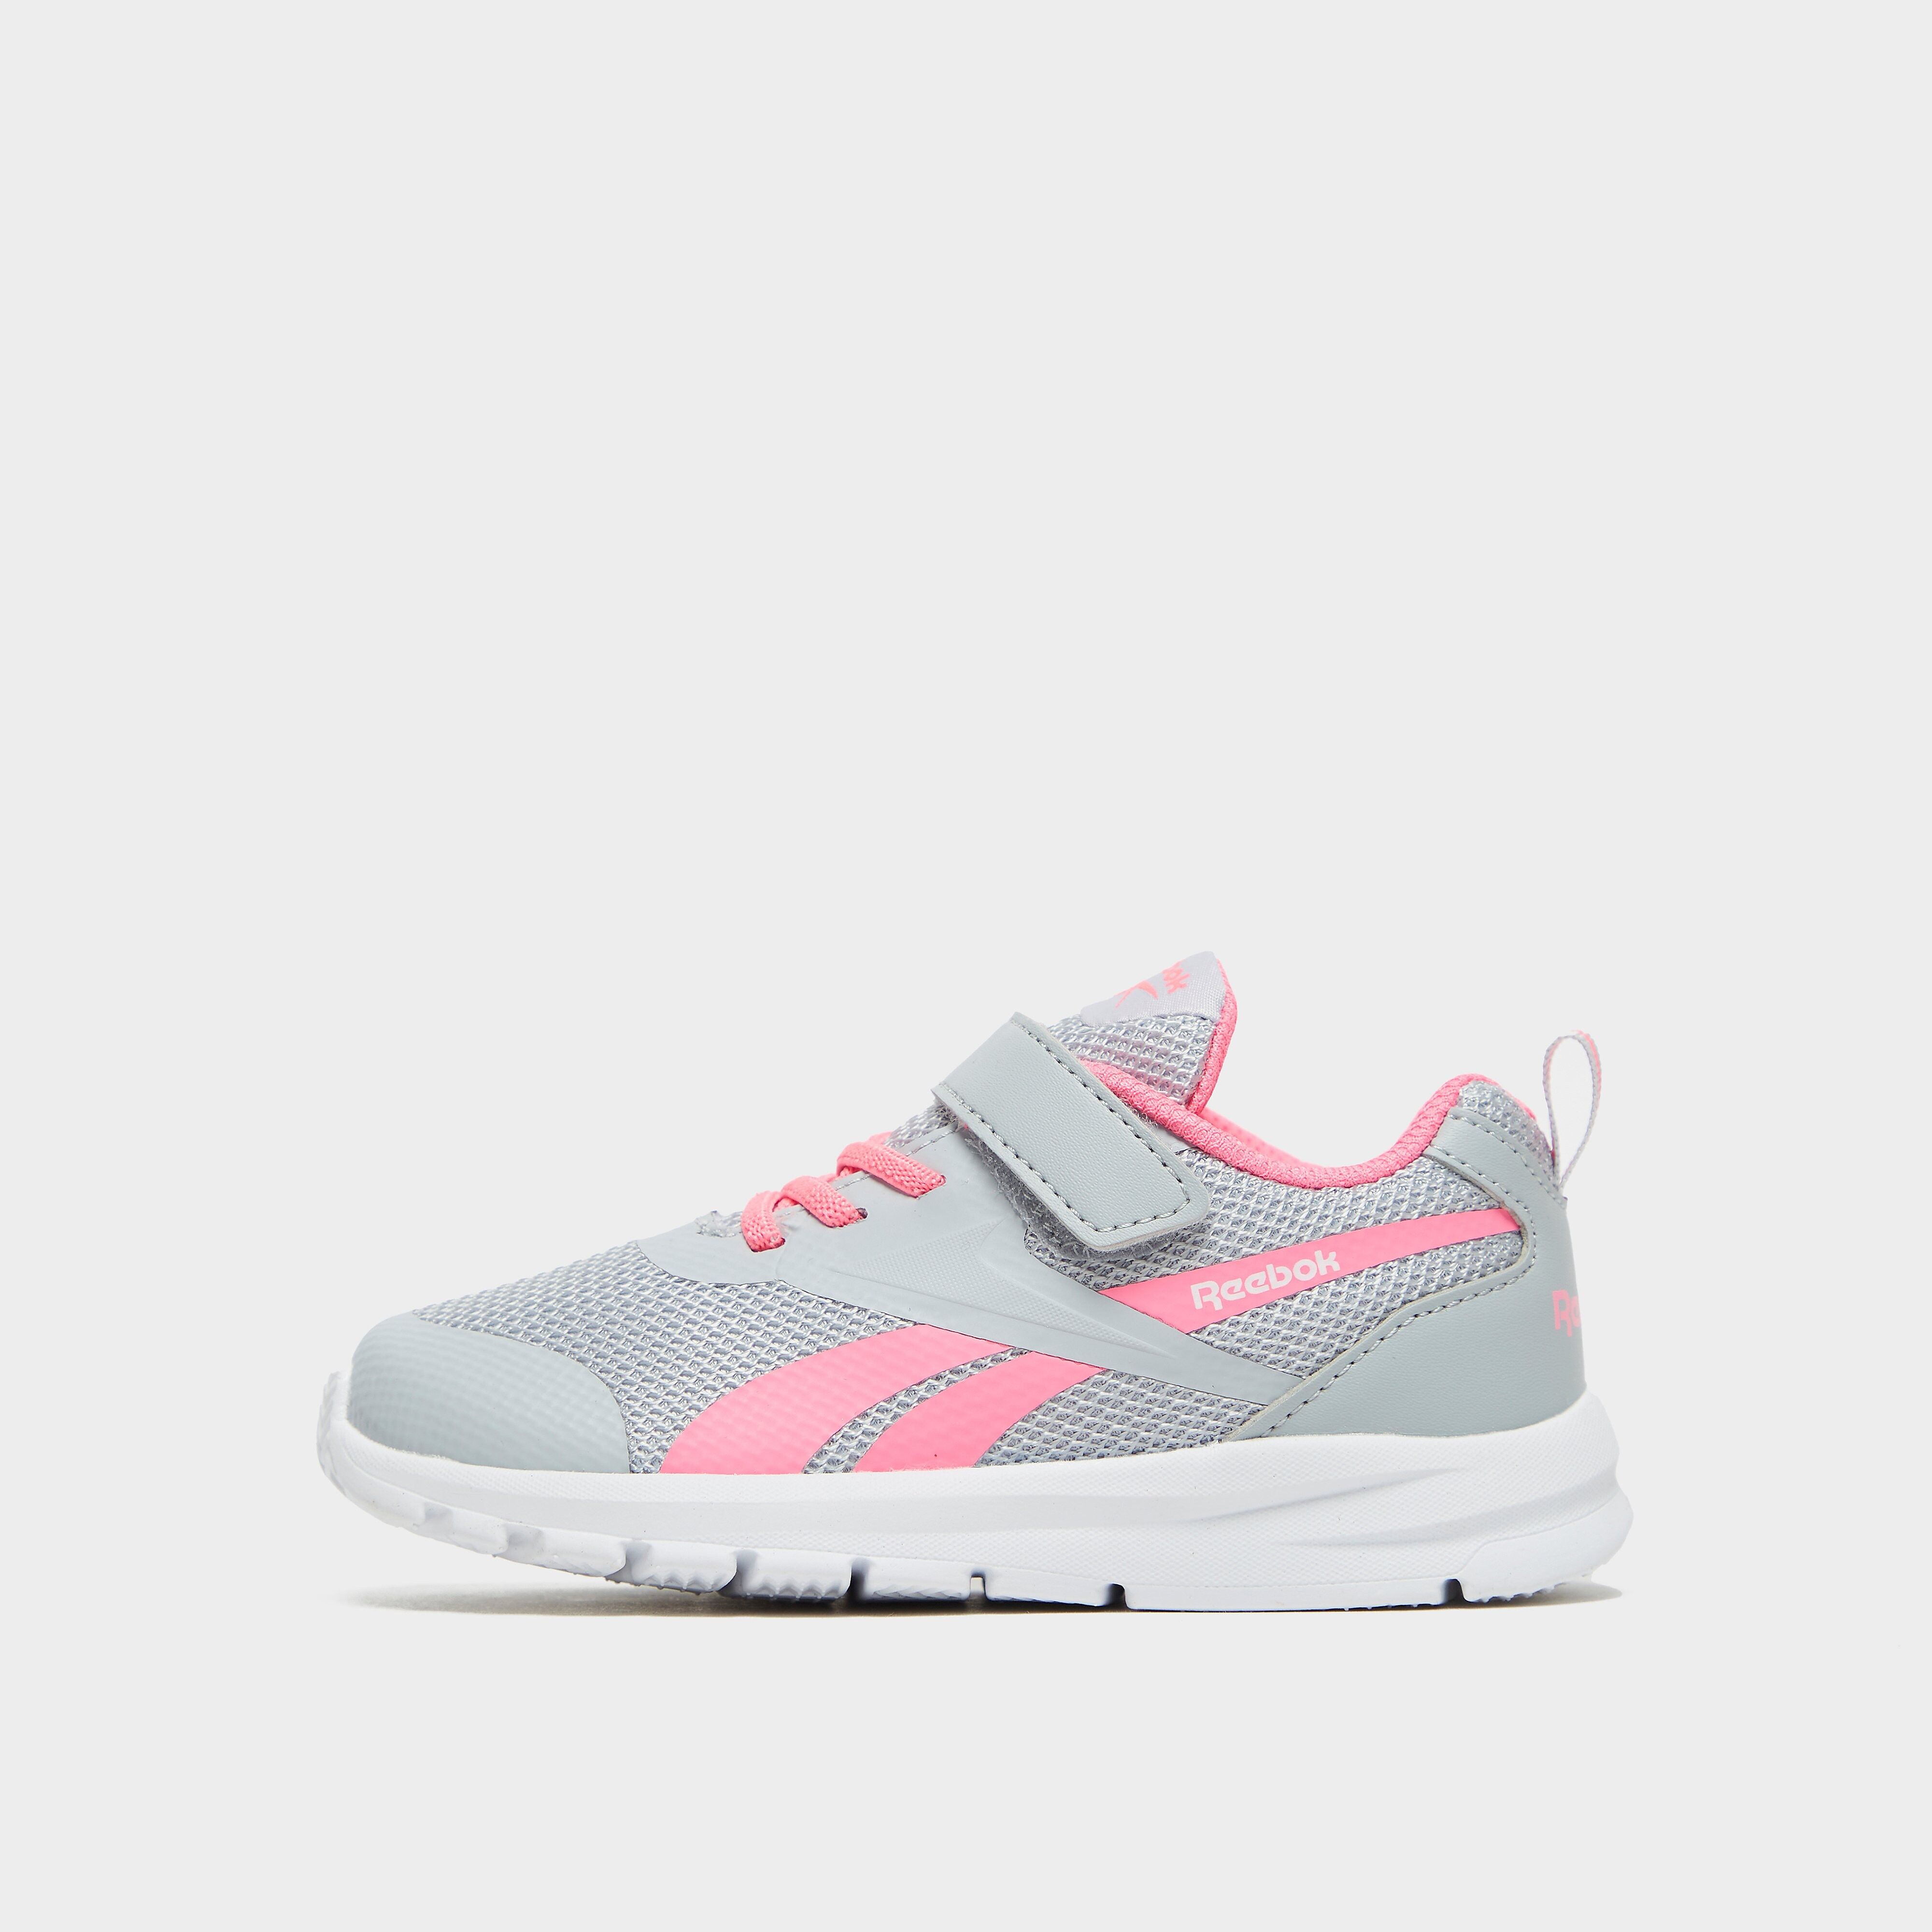 Reebok Rush Runner Infant - Cold Grey 2 / Electro Pink / White  size: 4.5